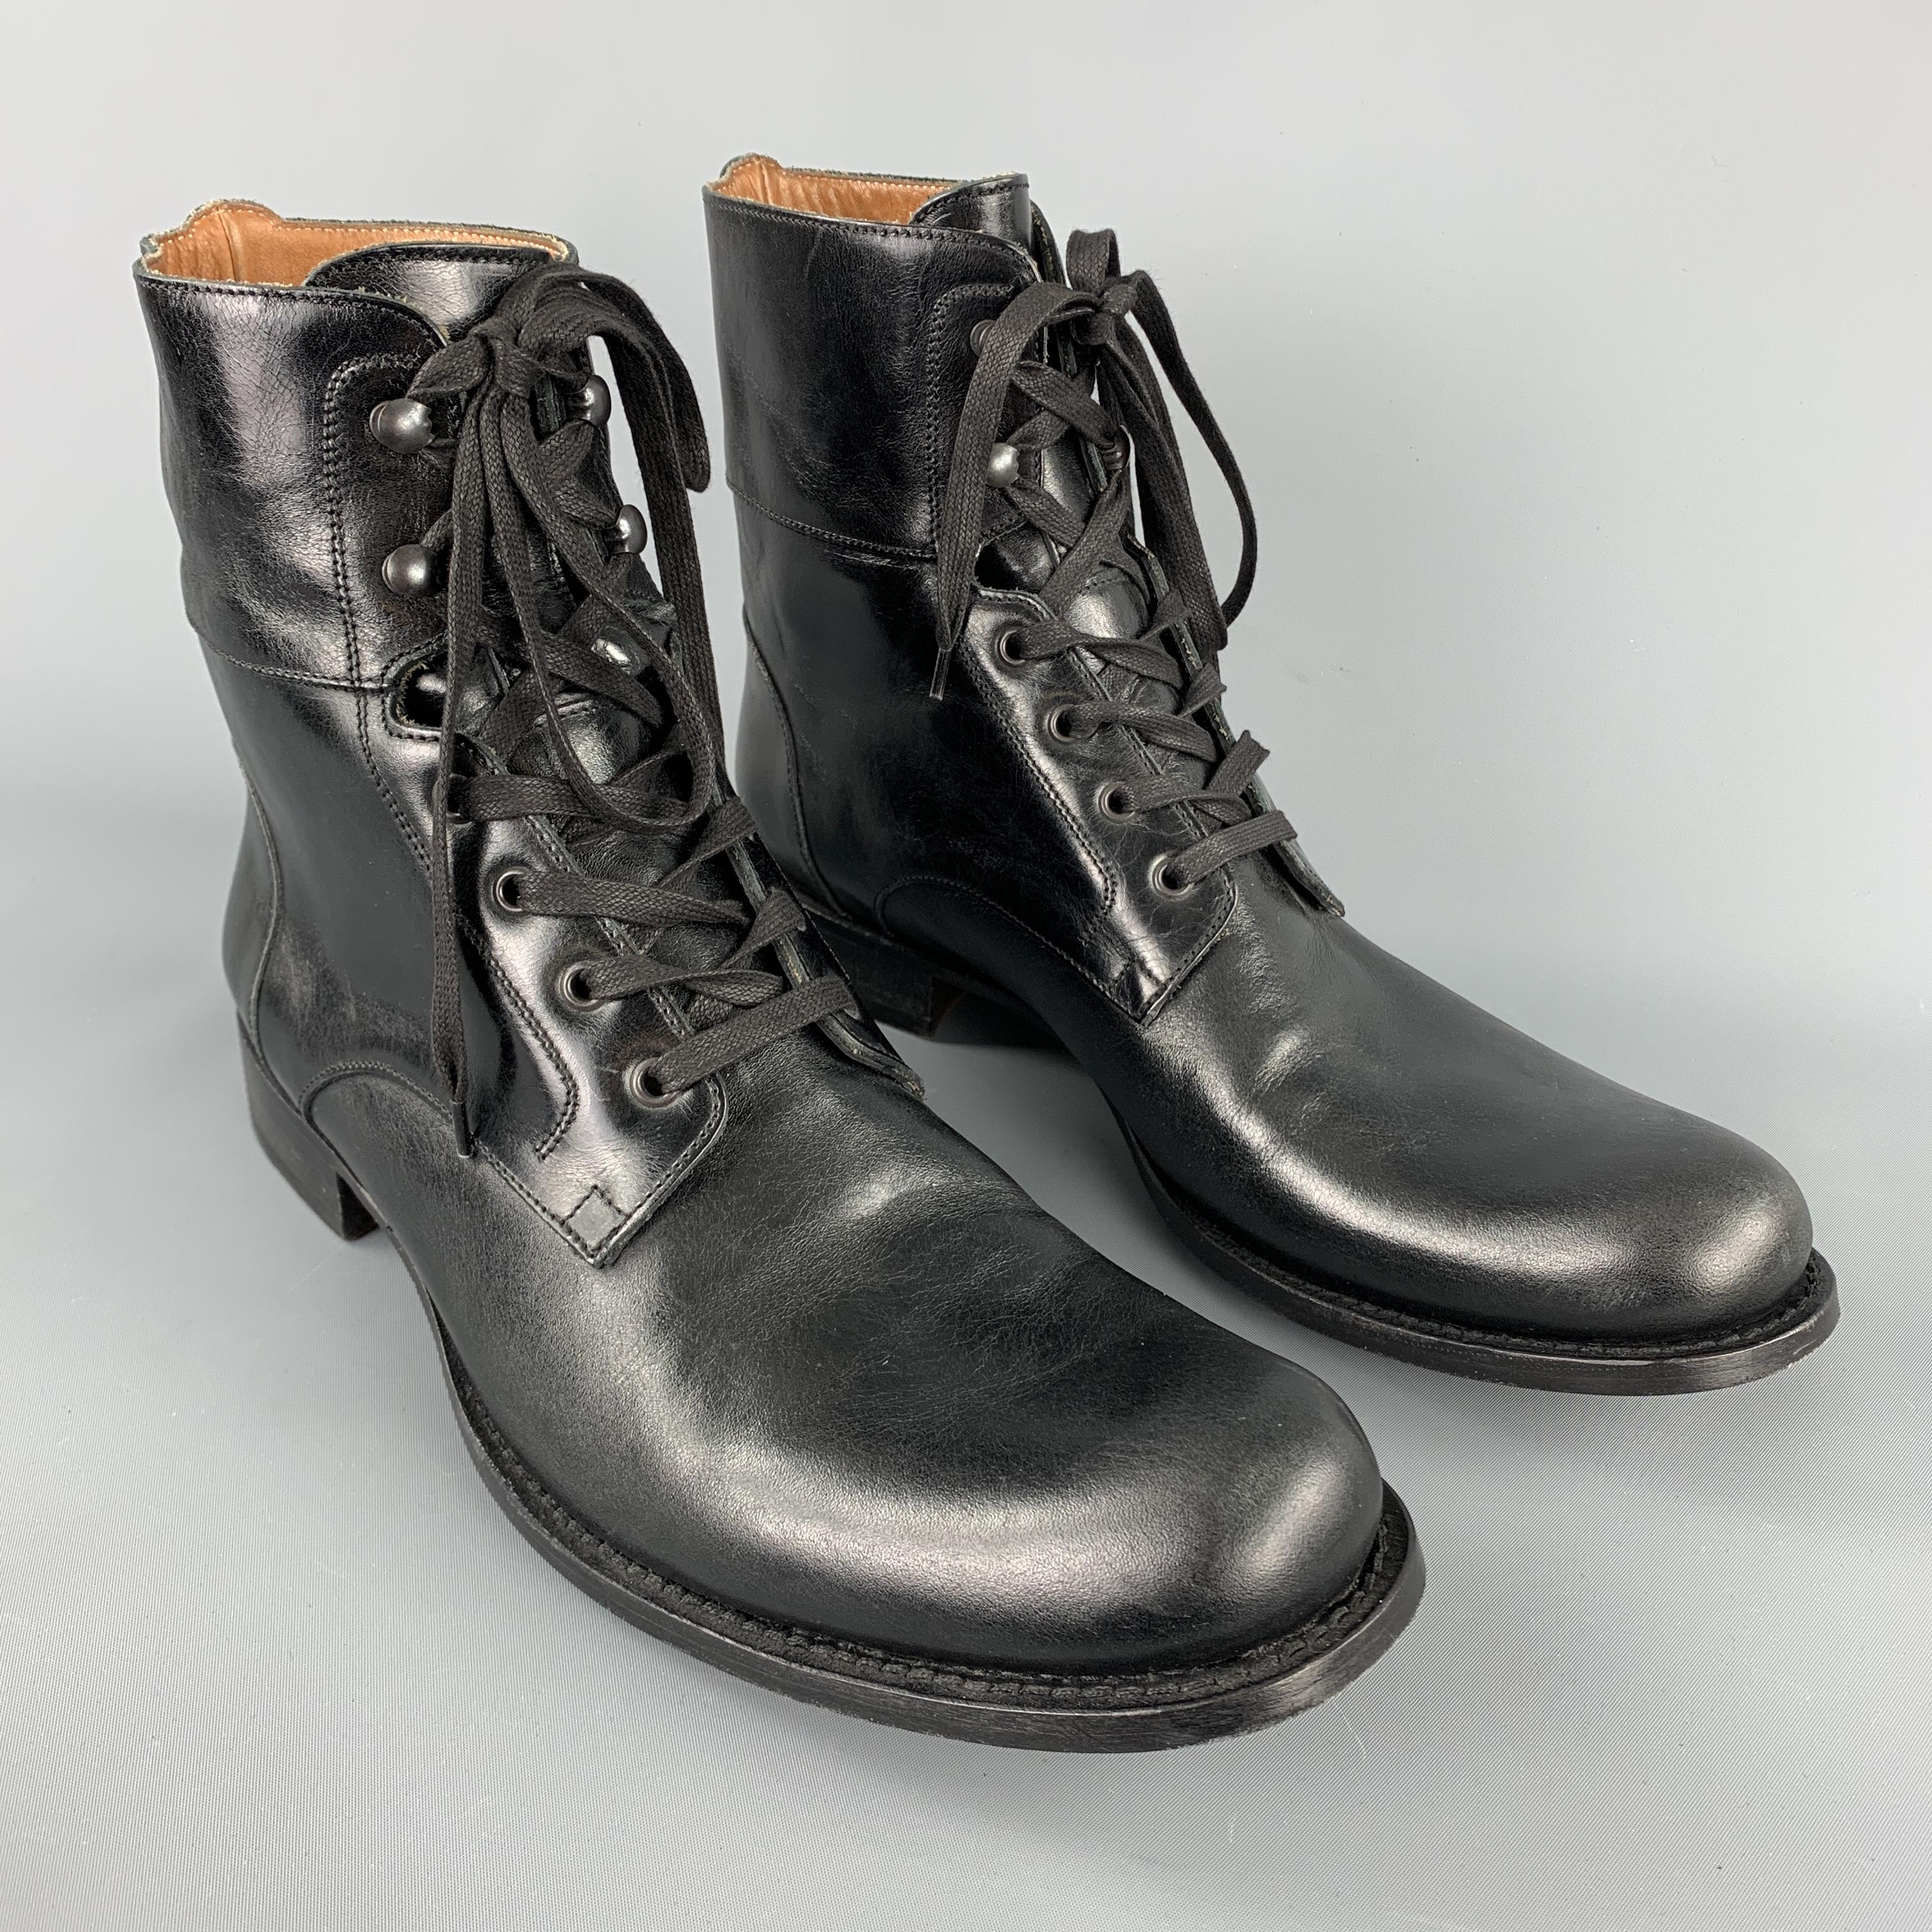 JOHN VARVATOS lace up ankle convert boots comes in a solid black leather material, with a leather insole and outsole. With box. Hand made in Italy.

Excellent Pre-Owned Condition.
Marked: US 12

Measurements:

Outsole: 13 x 4.5 in. 
Height: 8 in.